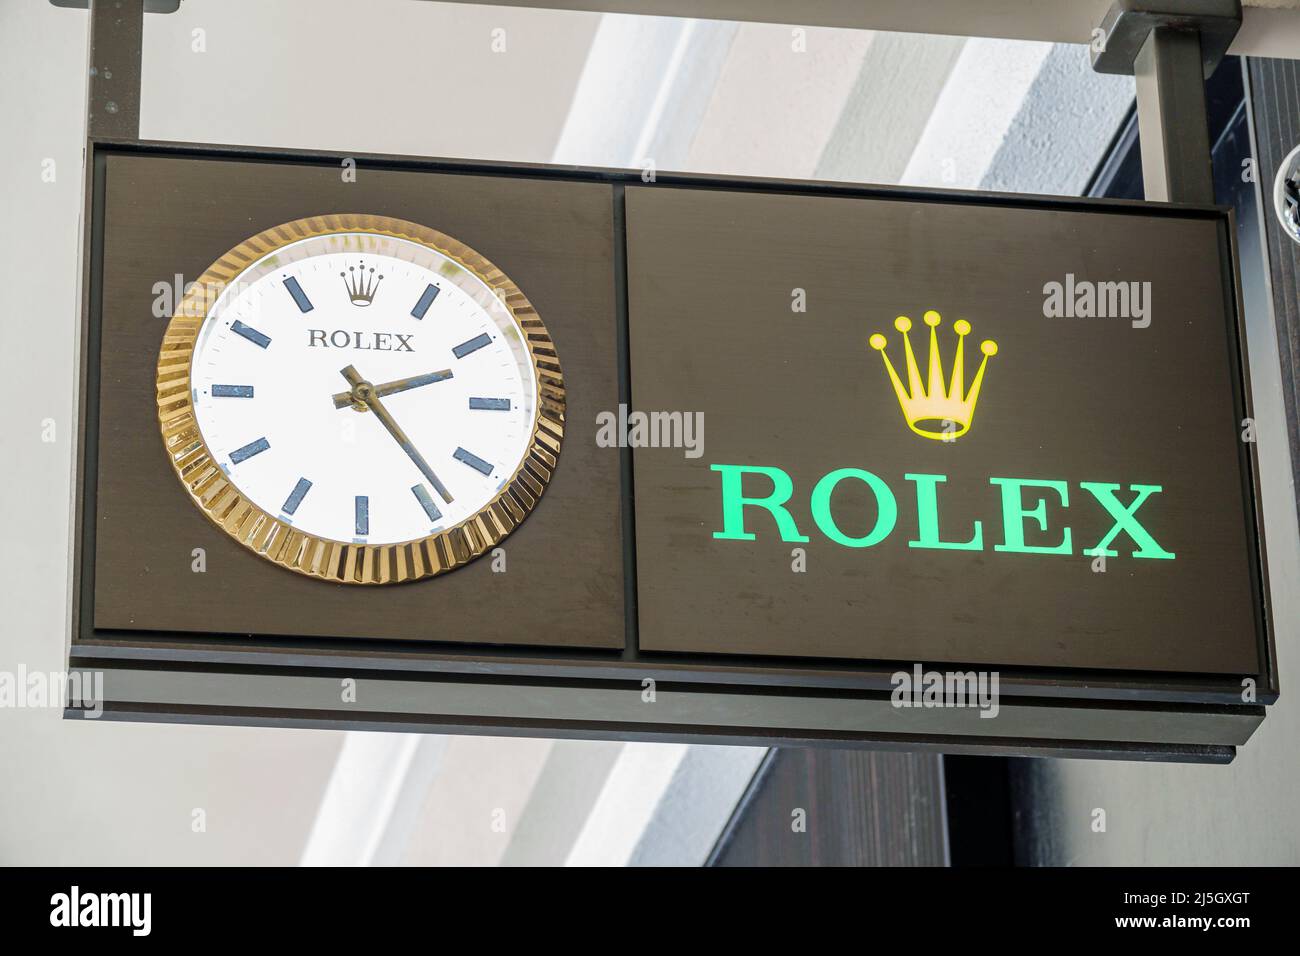 Miami Florida Coral Gables Shops at Merrick Park upscale outdoor shopping mall sign Rolex watches Stock Photo